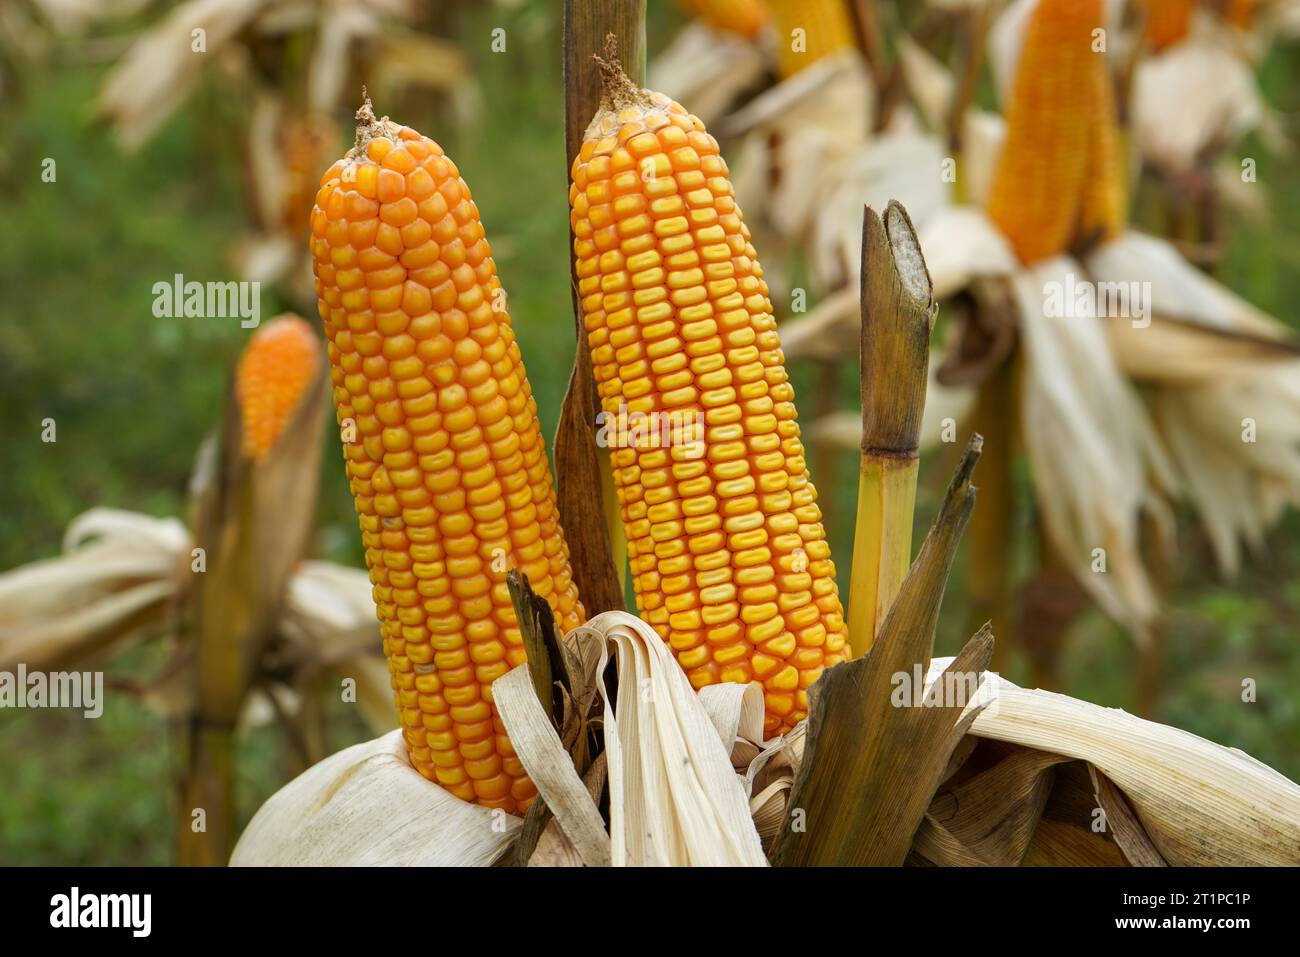 Corn is a tall annual cereal grass (Zea mays) that is widely grown for its large elongated ears of starchy seeds. The fruit of the sweet corn plant. Stock Photo